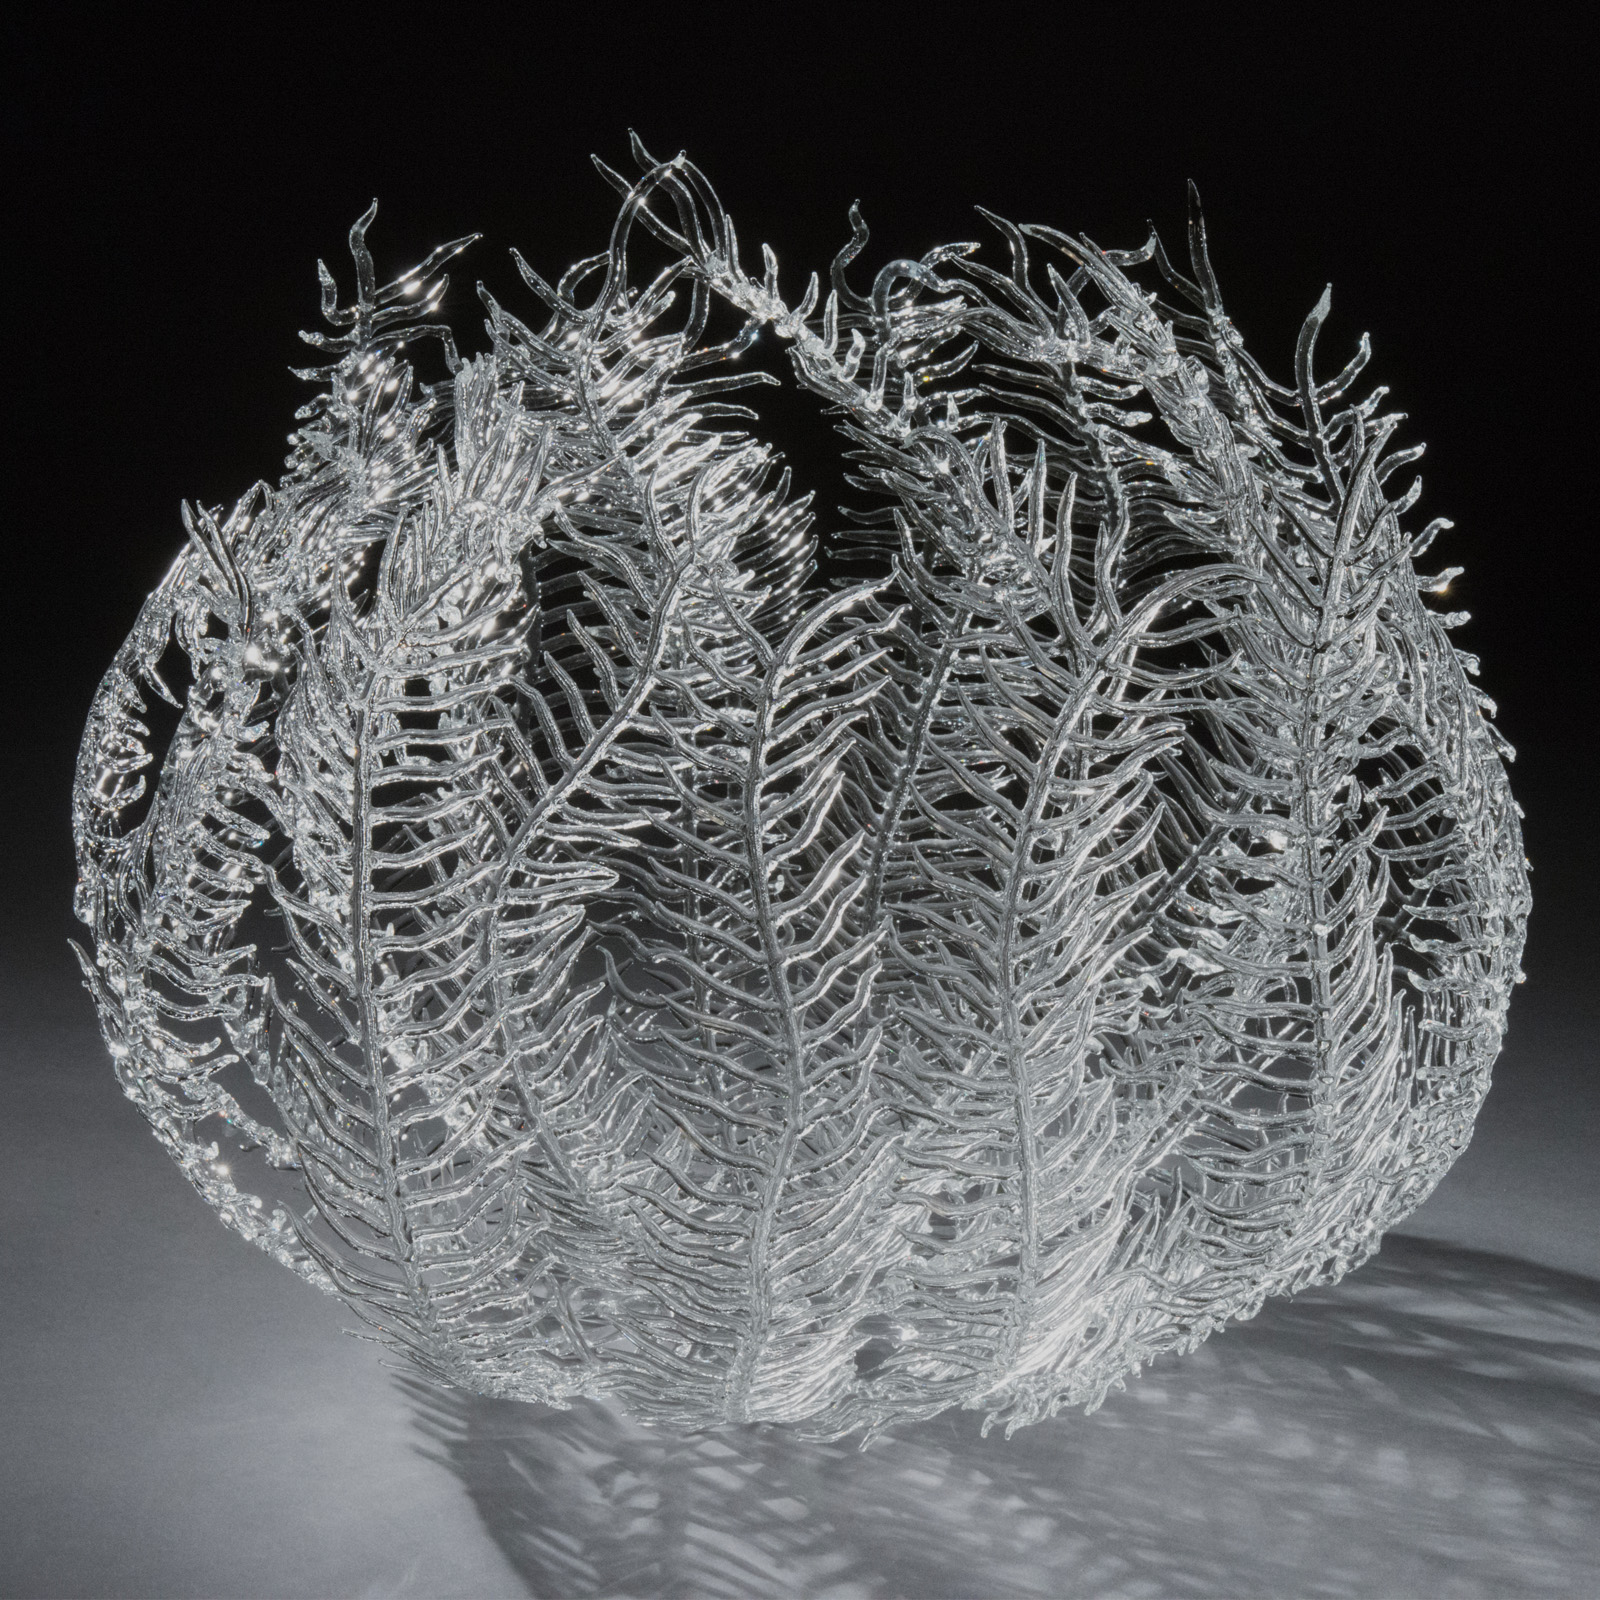 Glass Seaweed Sculpture, Flameworked Glass